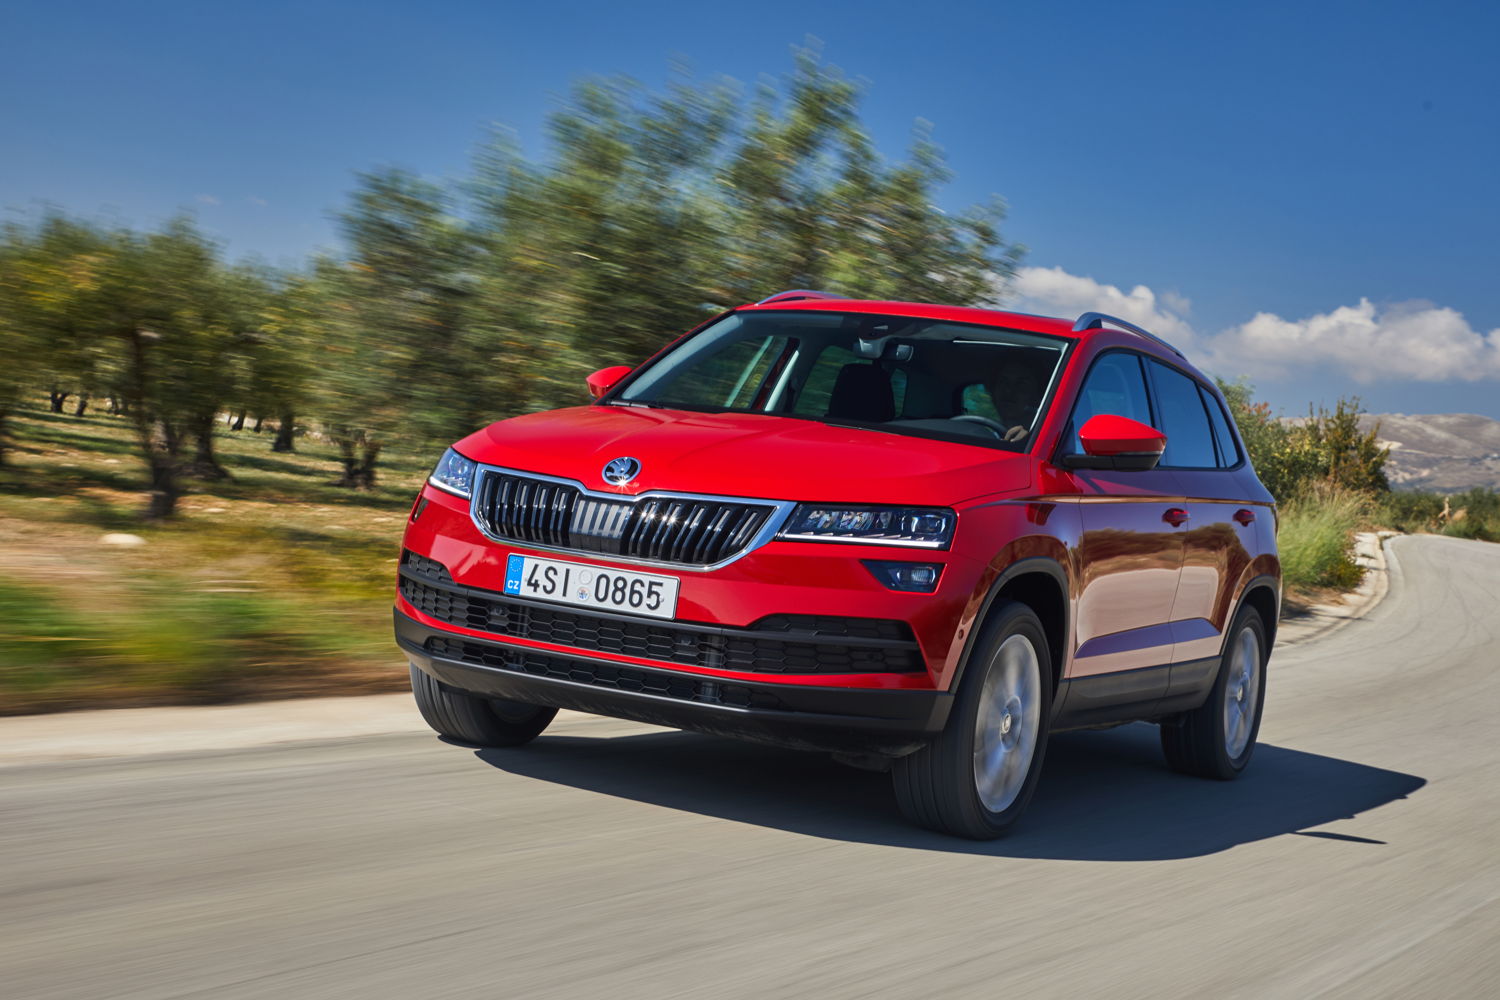 The SUV models KODIAQ and KAROQ (photo) are a cornerstone of the Czech carmaker’s dynamic growth.